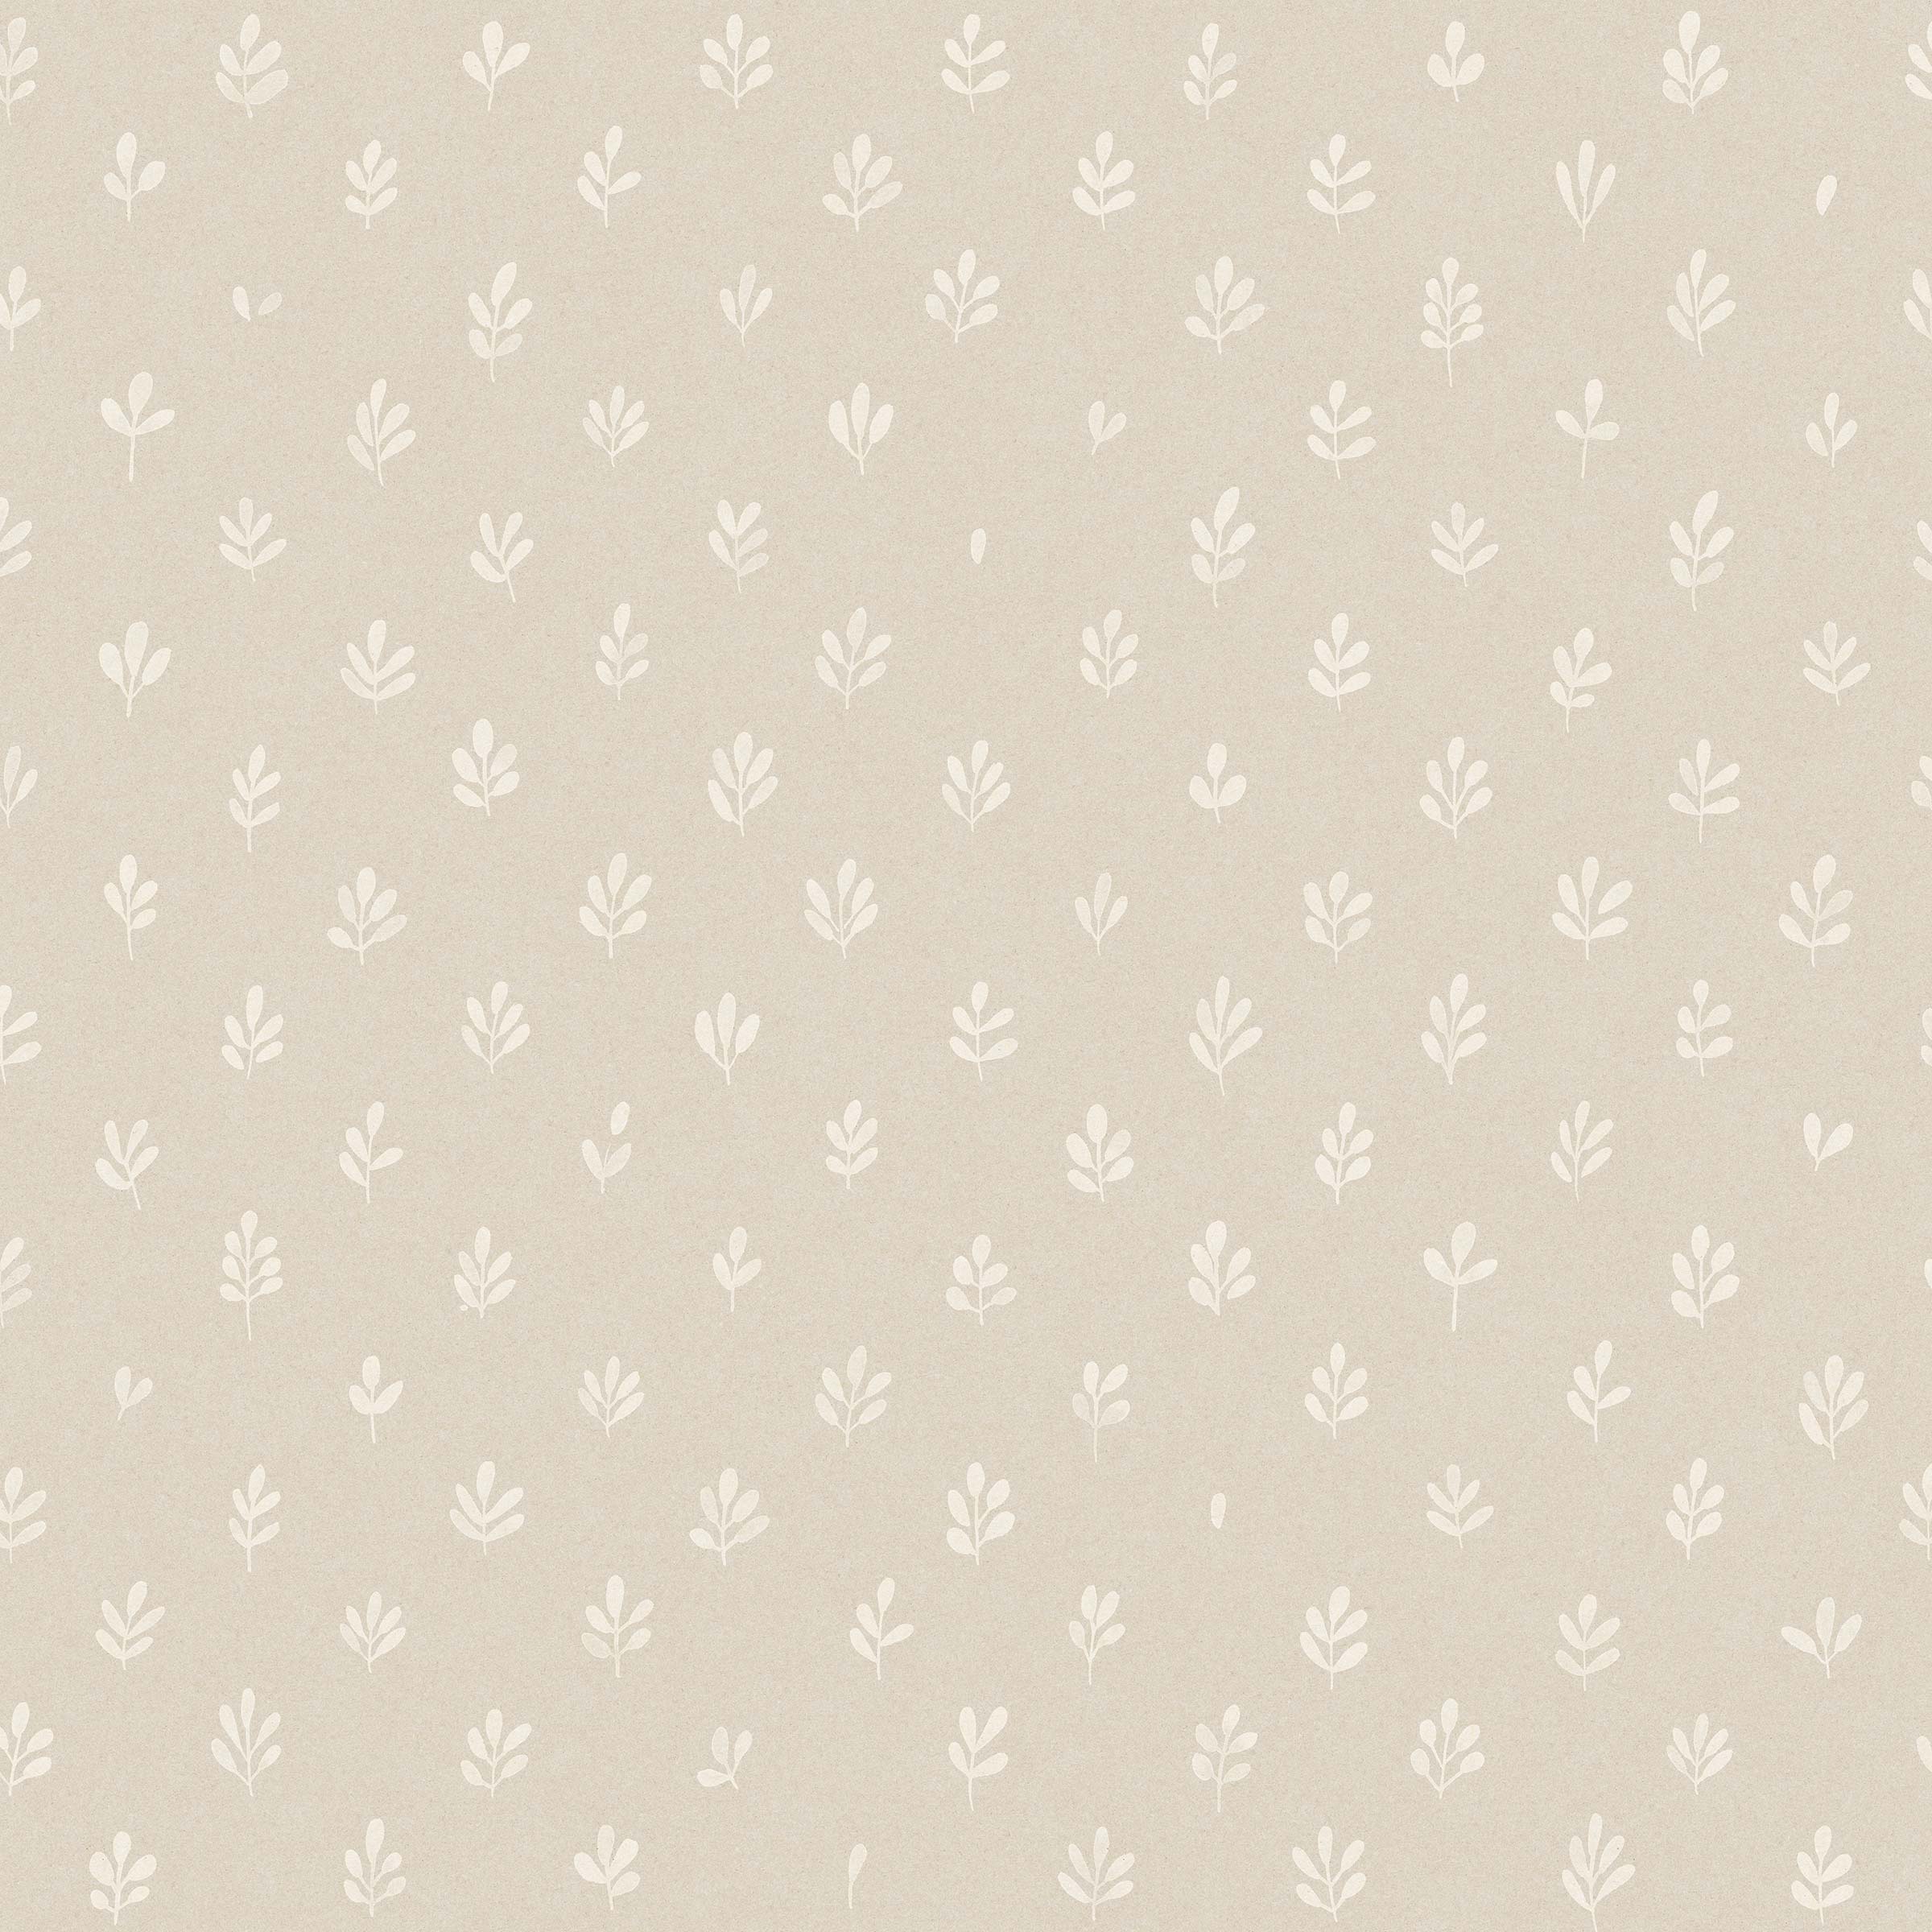 Detail of wallpaper in a repeating leaf print in white on a cream field.